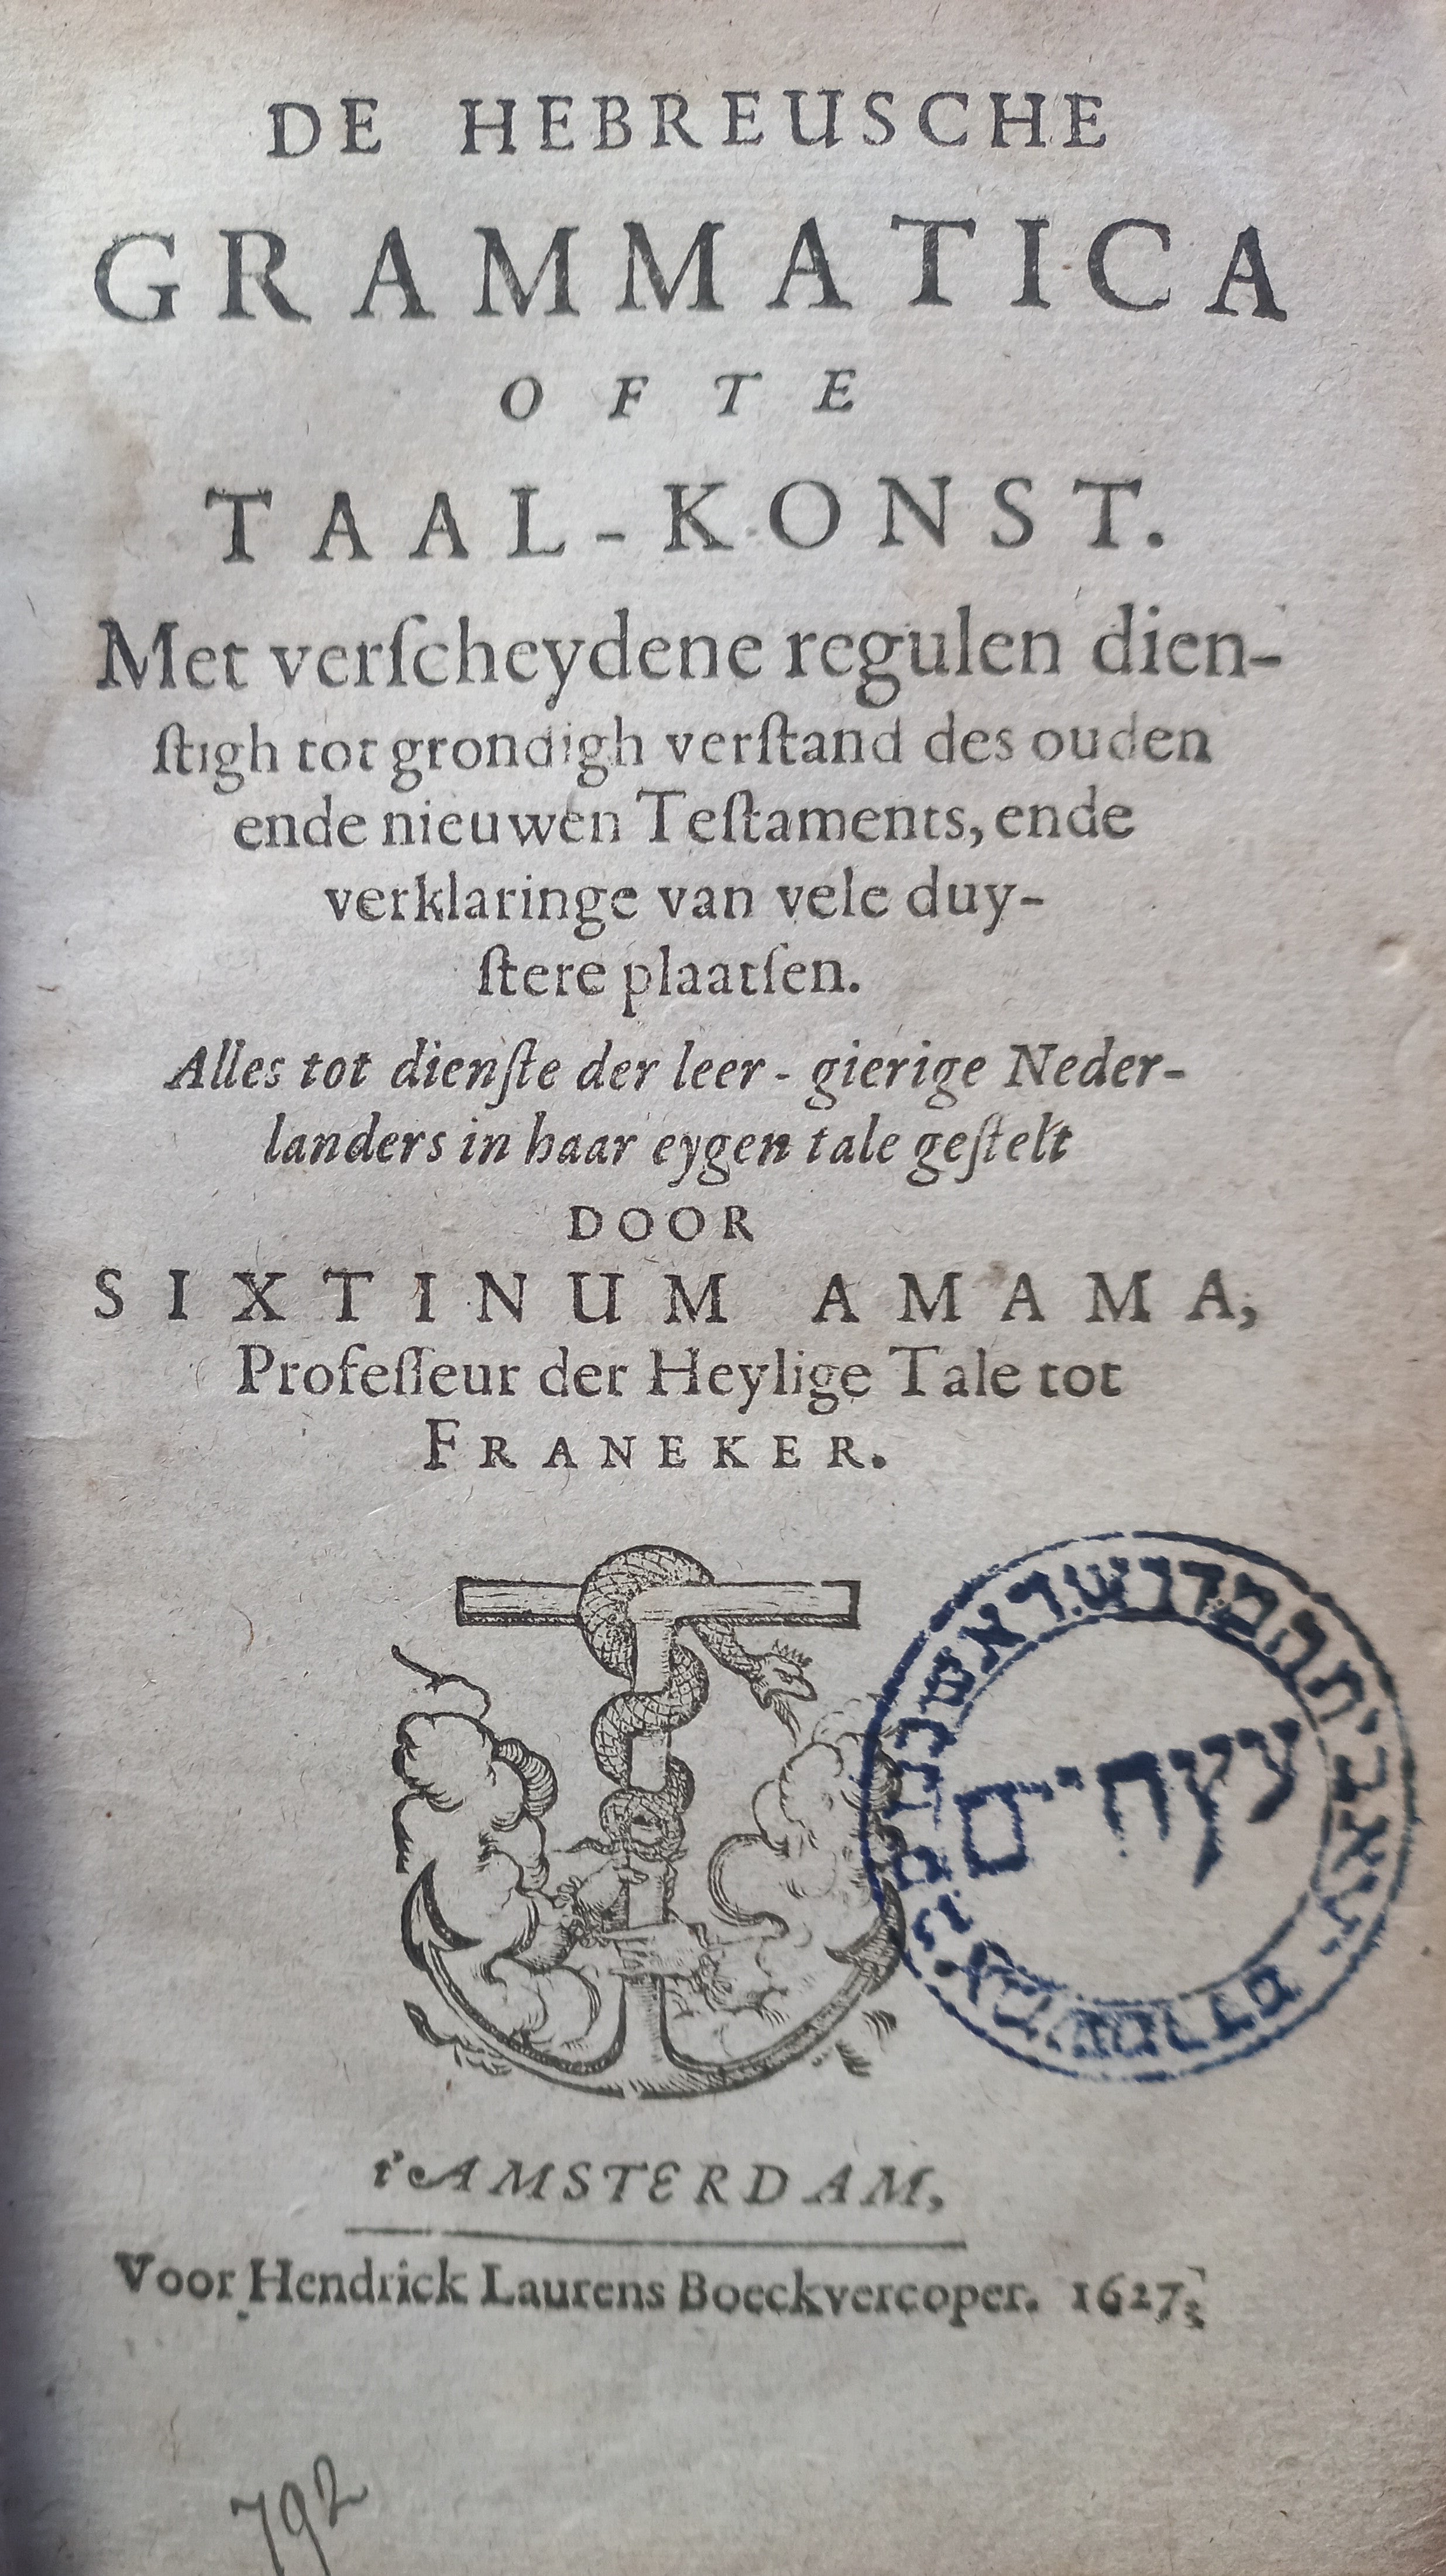 The 'Hebreusche grammatica ofte taal-konst' from 1627 is one of the gems from the library that the couple Postma-Gosker donated to the VU in 2012.